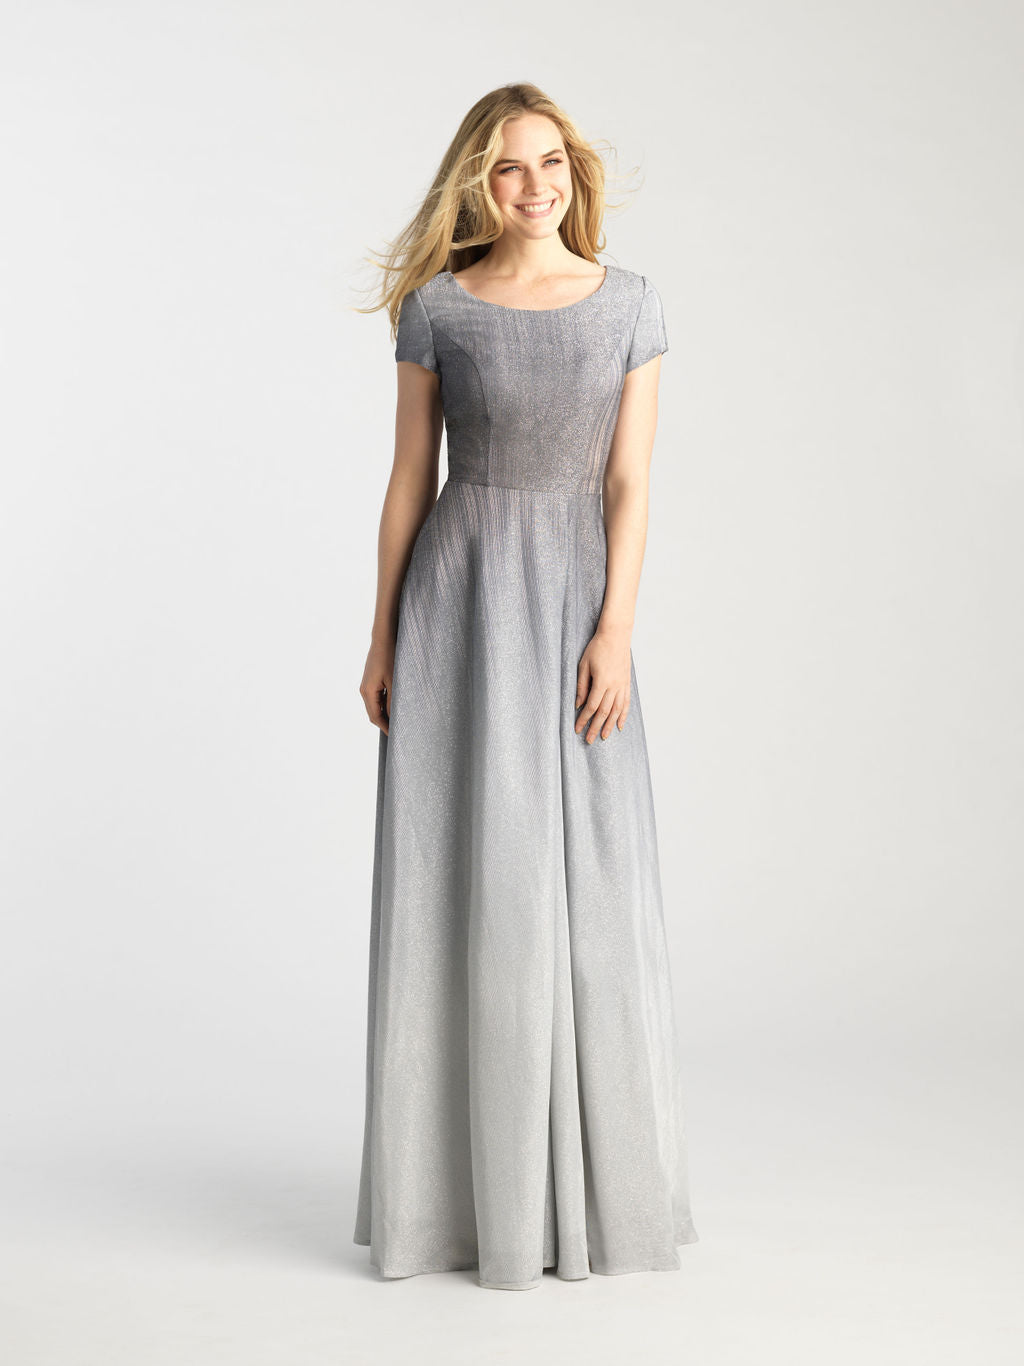 Silver and Gray Ombre A-Line Gown